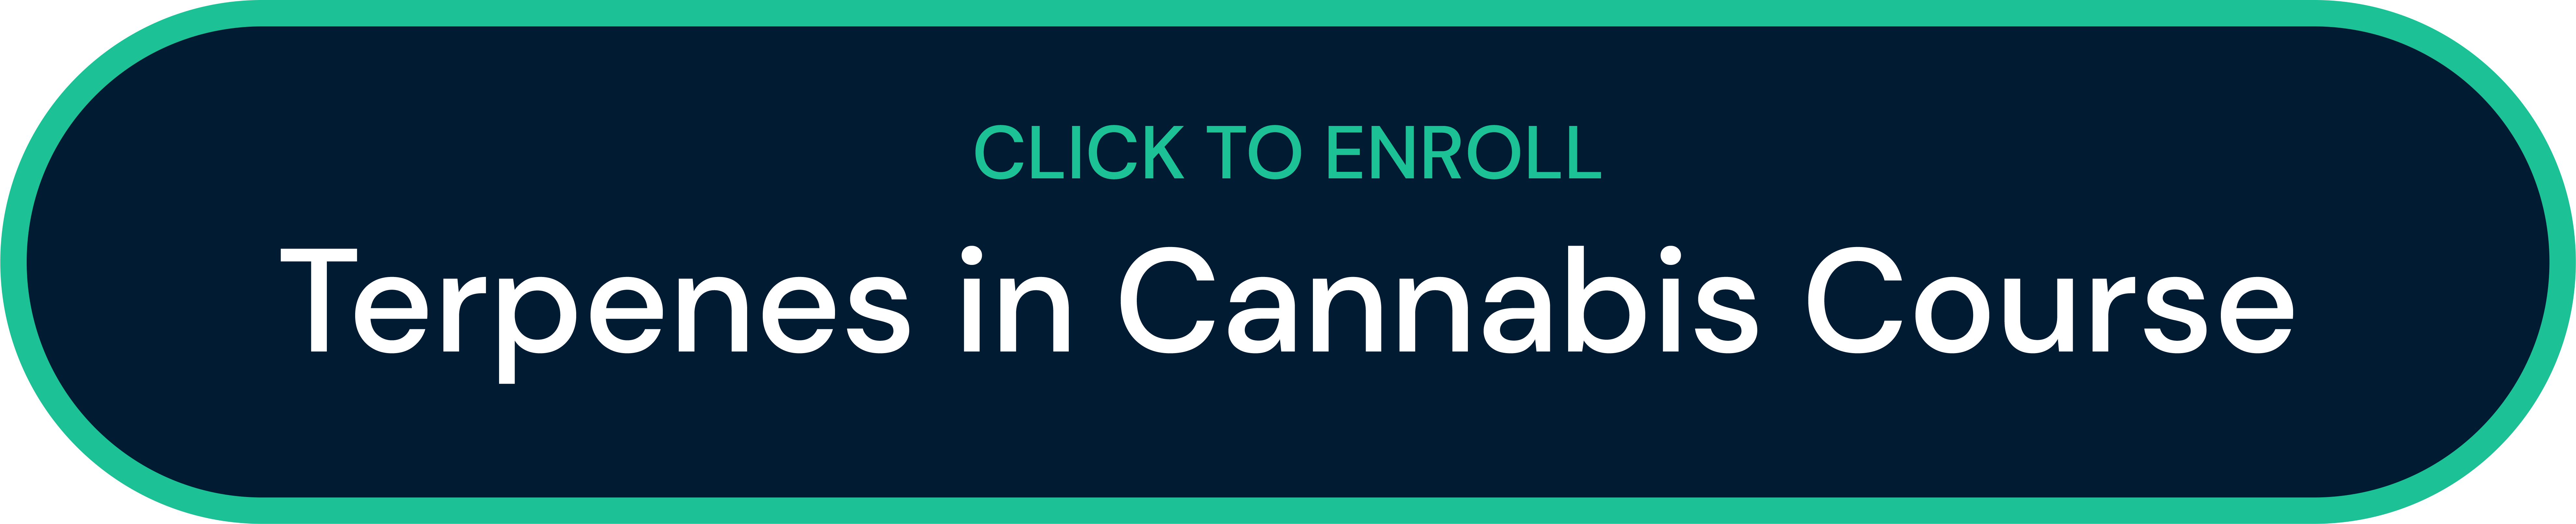 Enroll for free in the Terpenes in Cannabis Course.